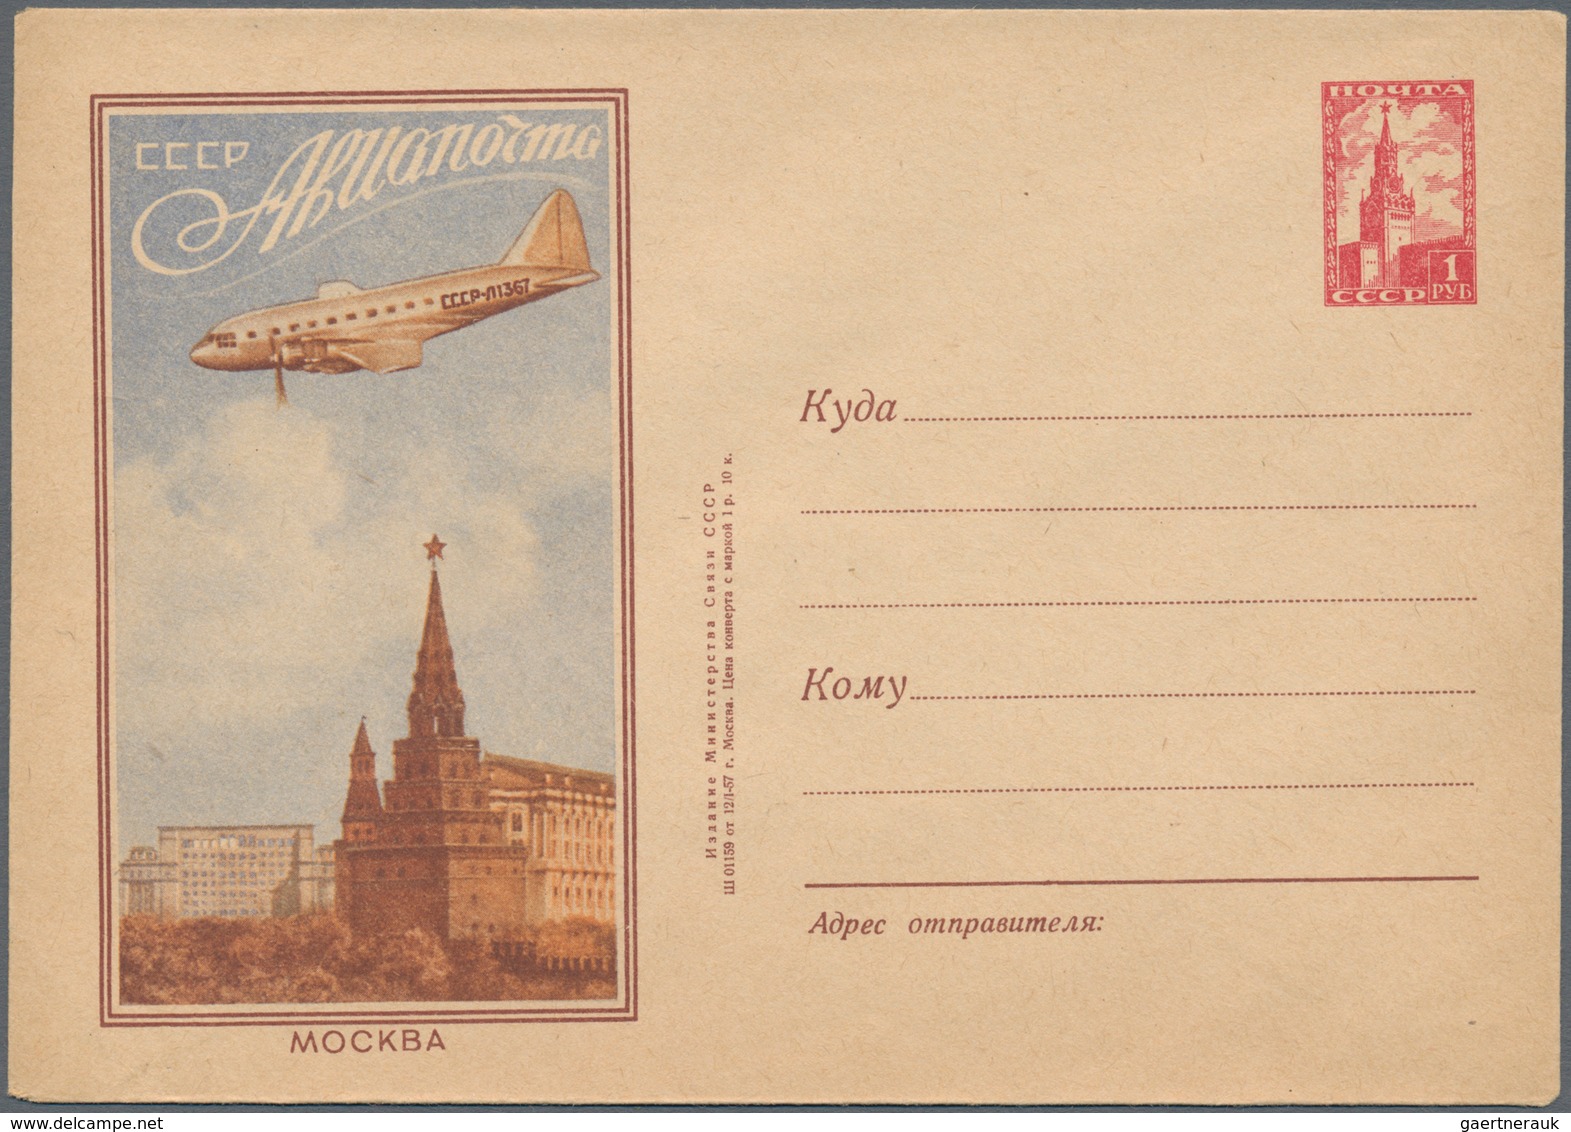 Sowjetunion: 1955/77 ca. 810 pictured postal stationery envelopes only airmail, very great variety o